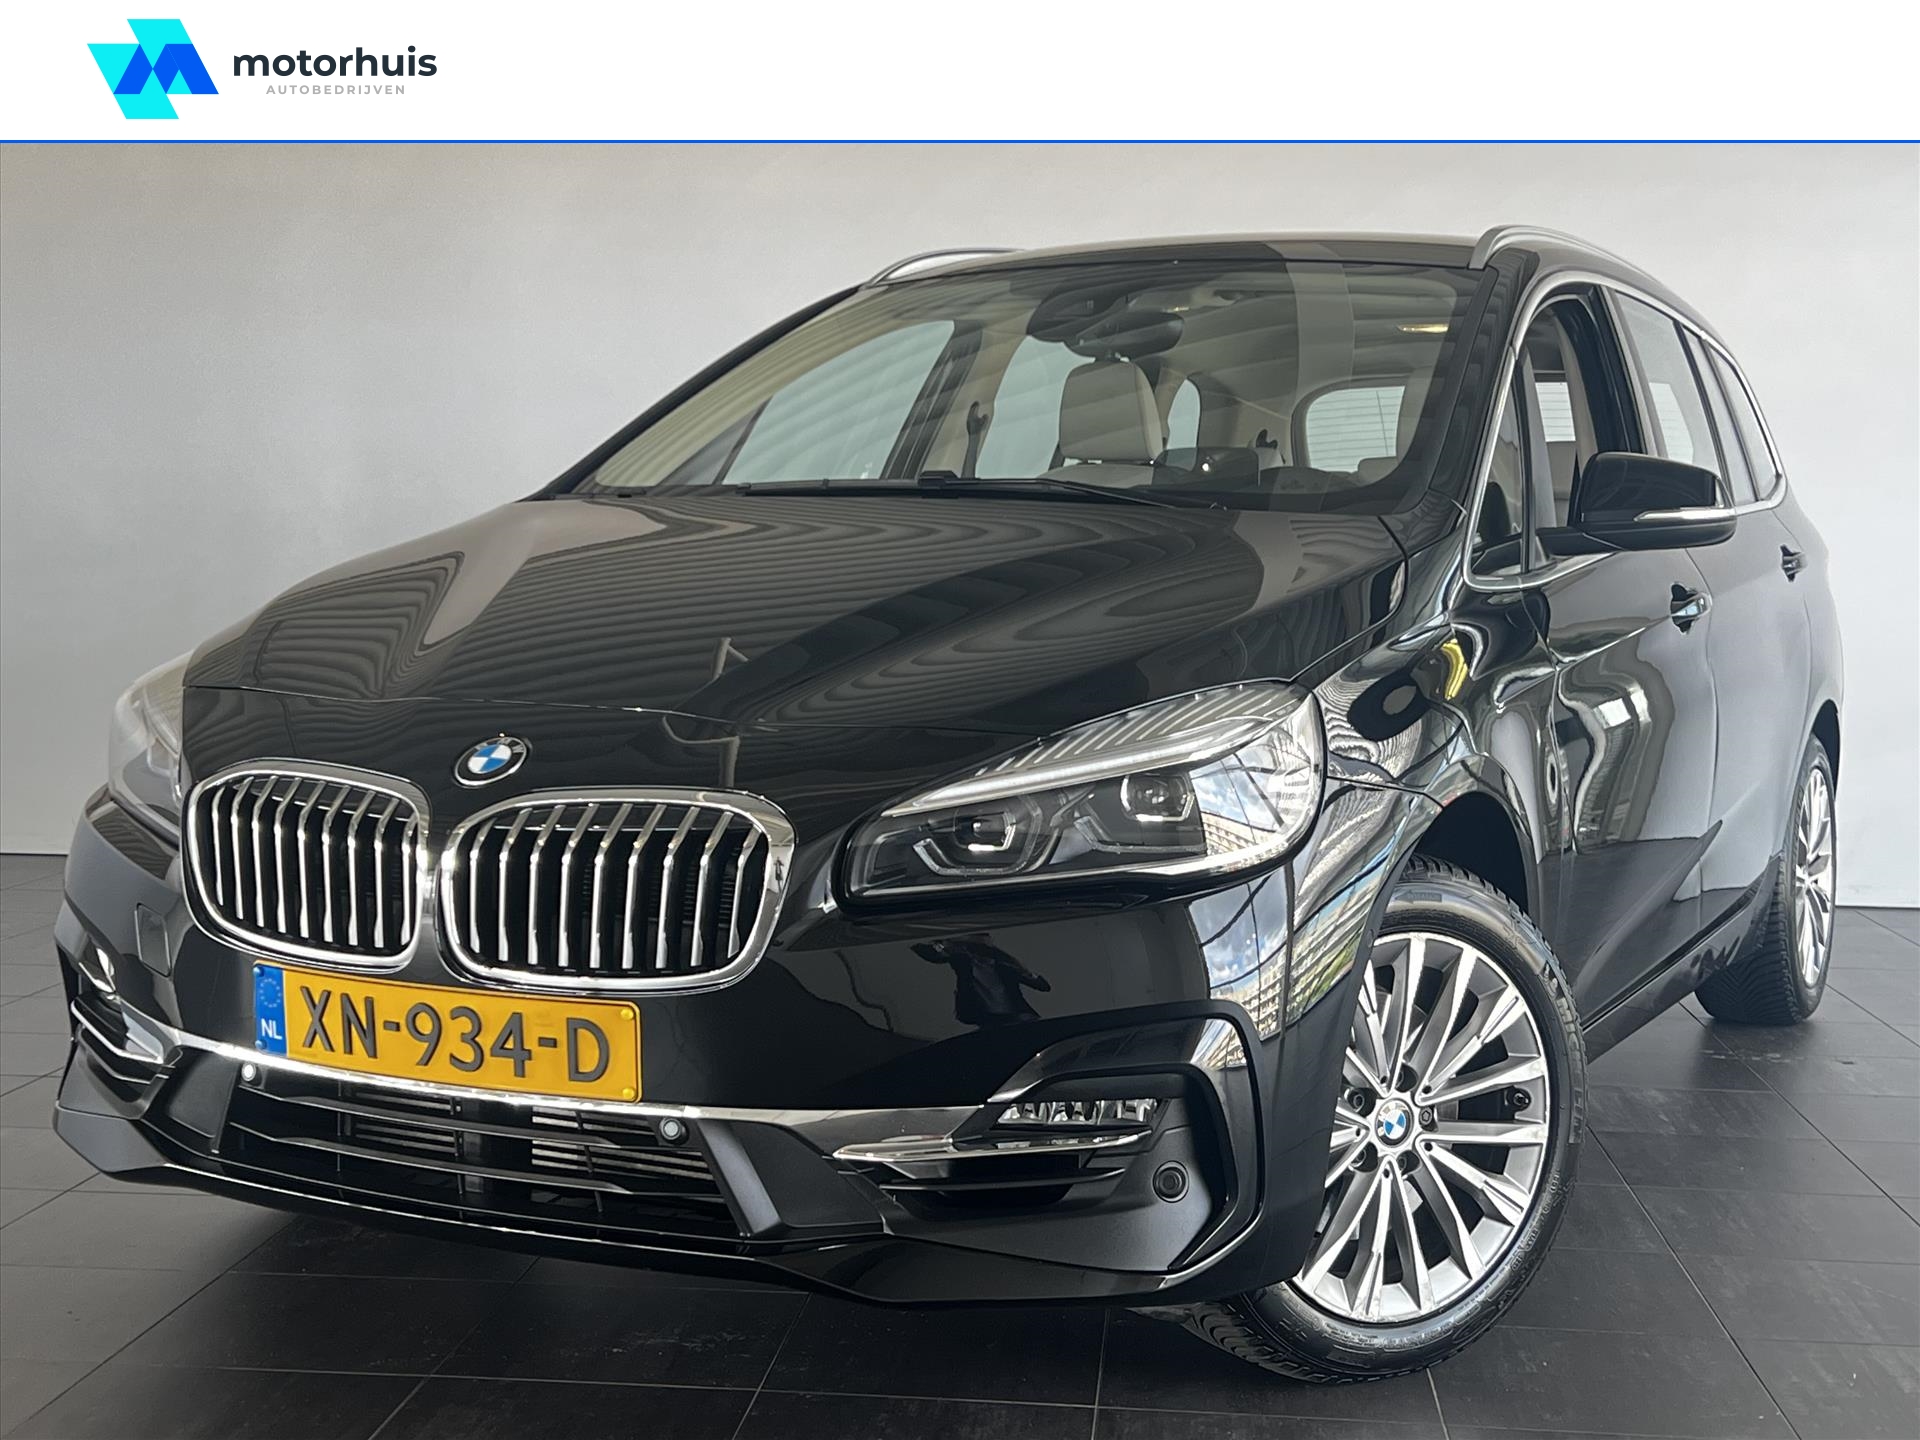 BMW 2-Serie Gran Tourer (f46) 218i 140pk Corporate Lease Edition Automaat 7-Pers. bij viaBOVAG.nl